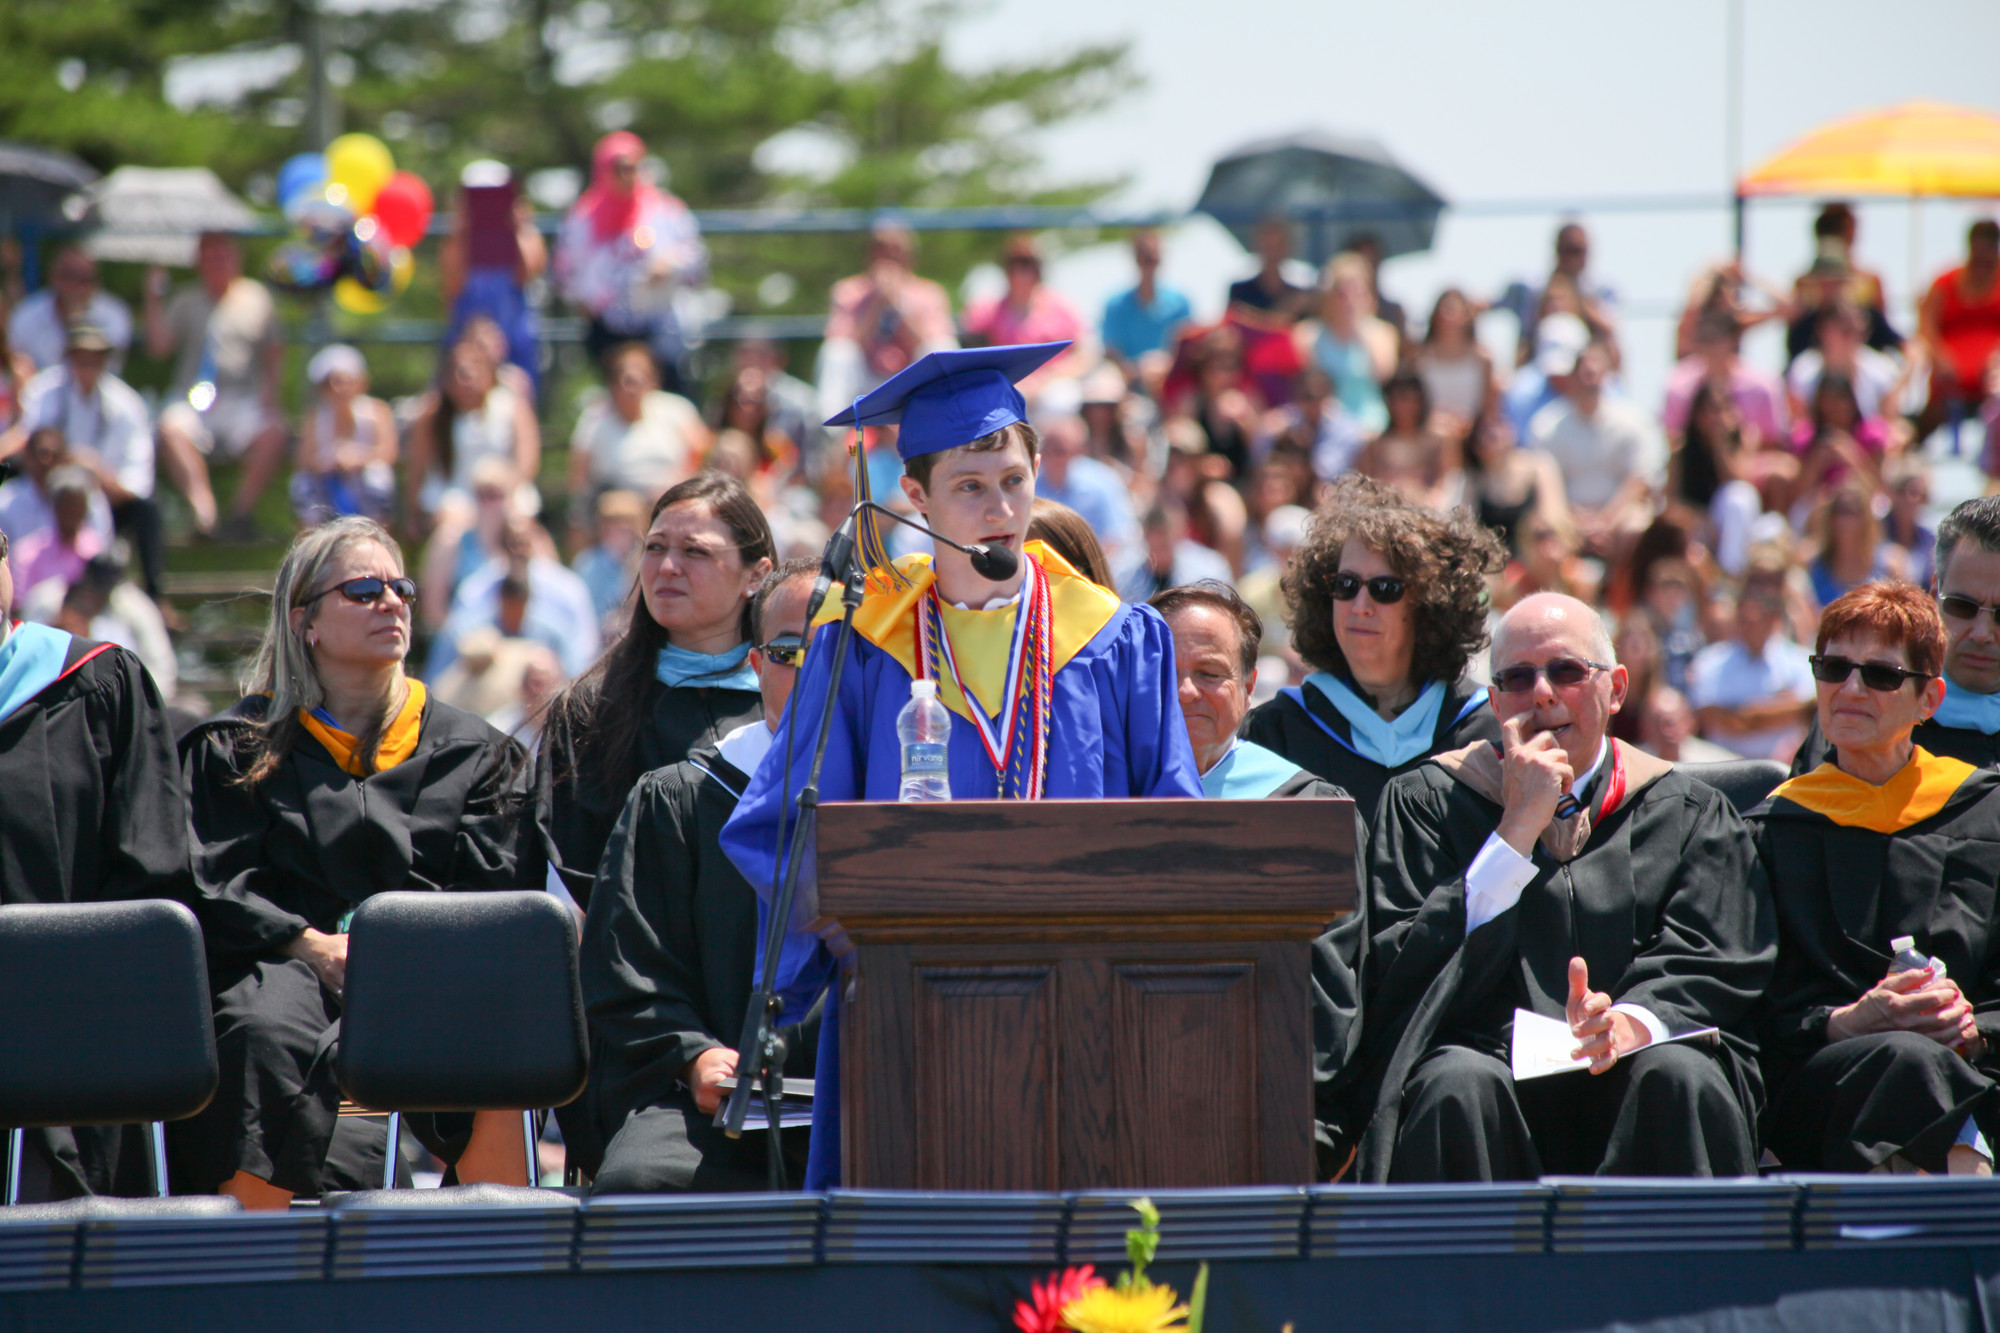 Valedictorian Nathan Siegelaub addressed students, parents and faculty at the ceremony.